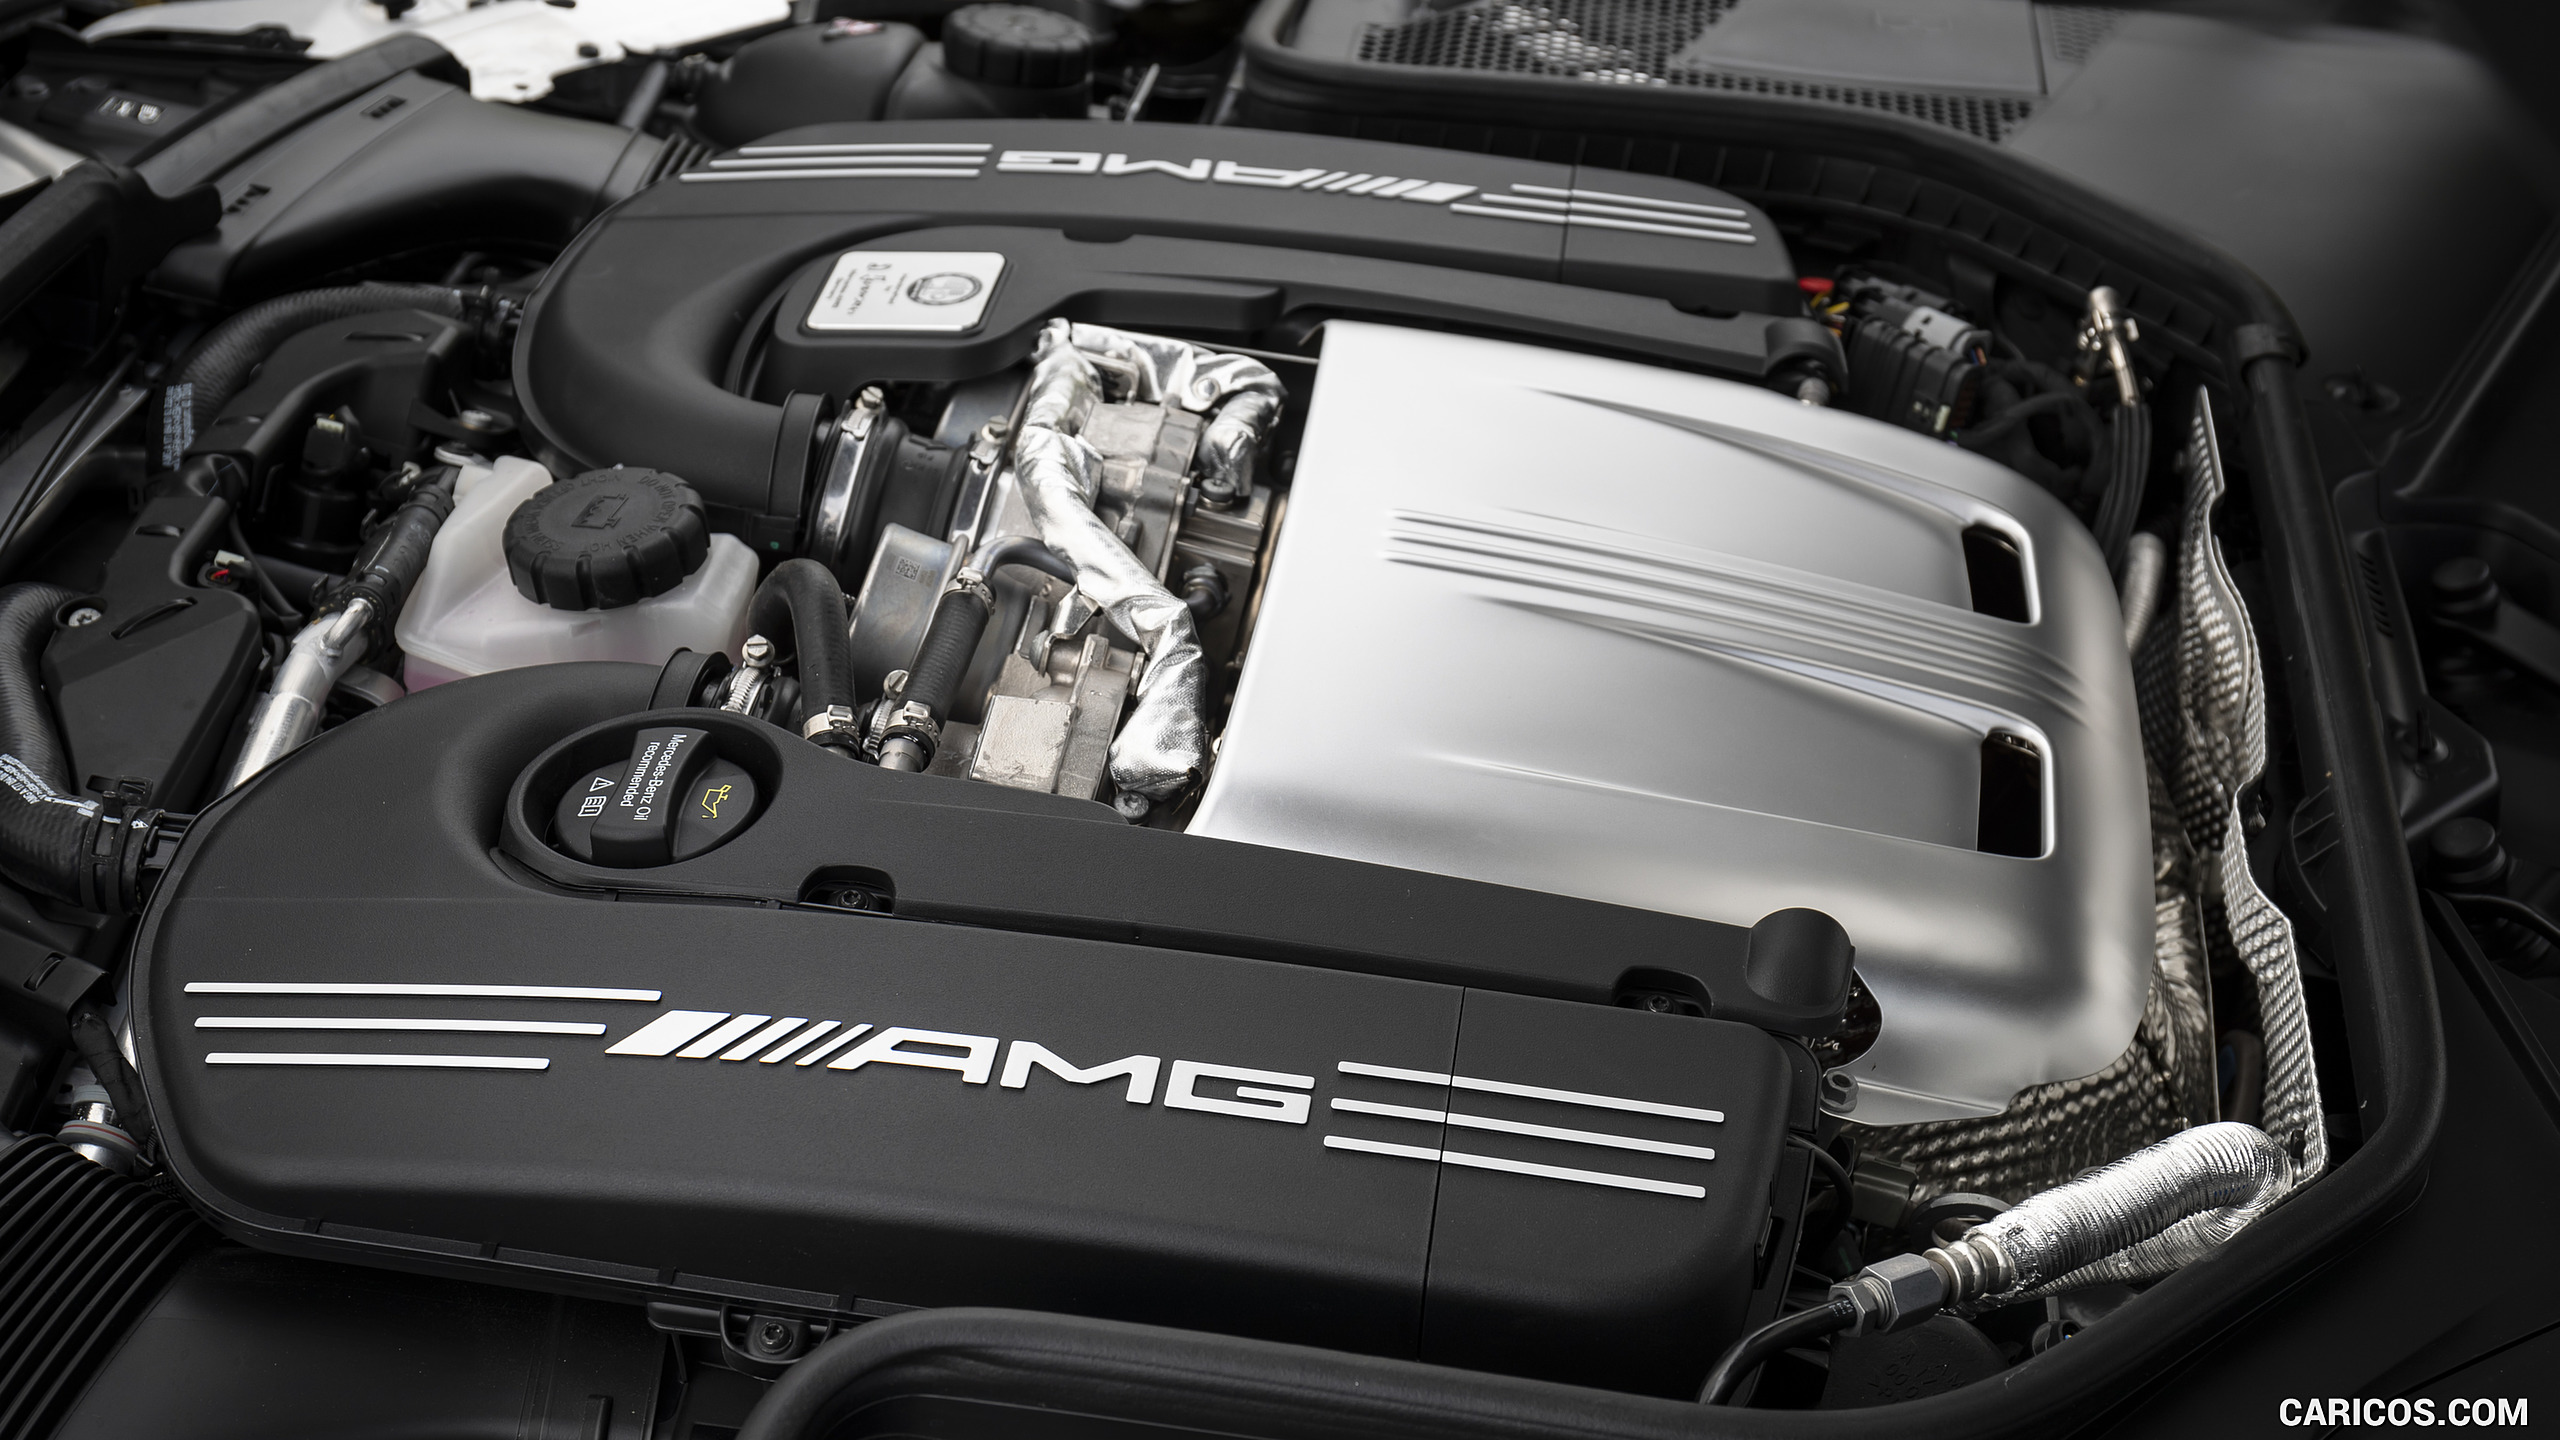 2019 Mercedes-AMG C 63 S Coupe - Engine, #88 of 106